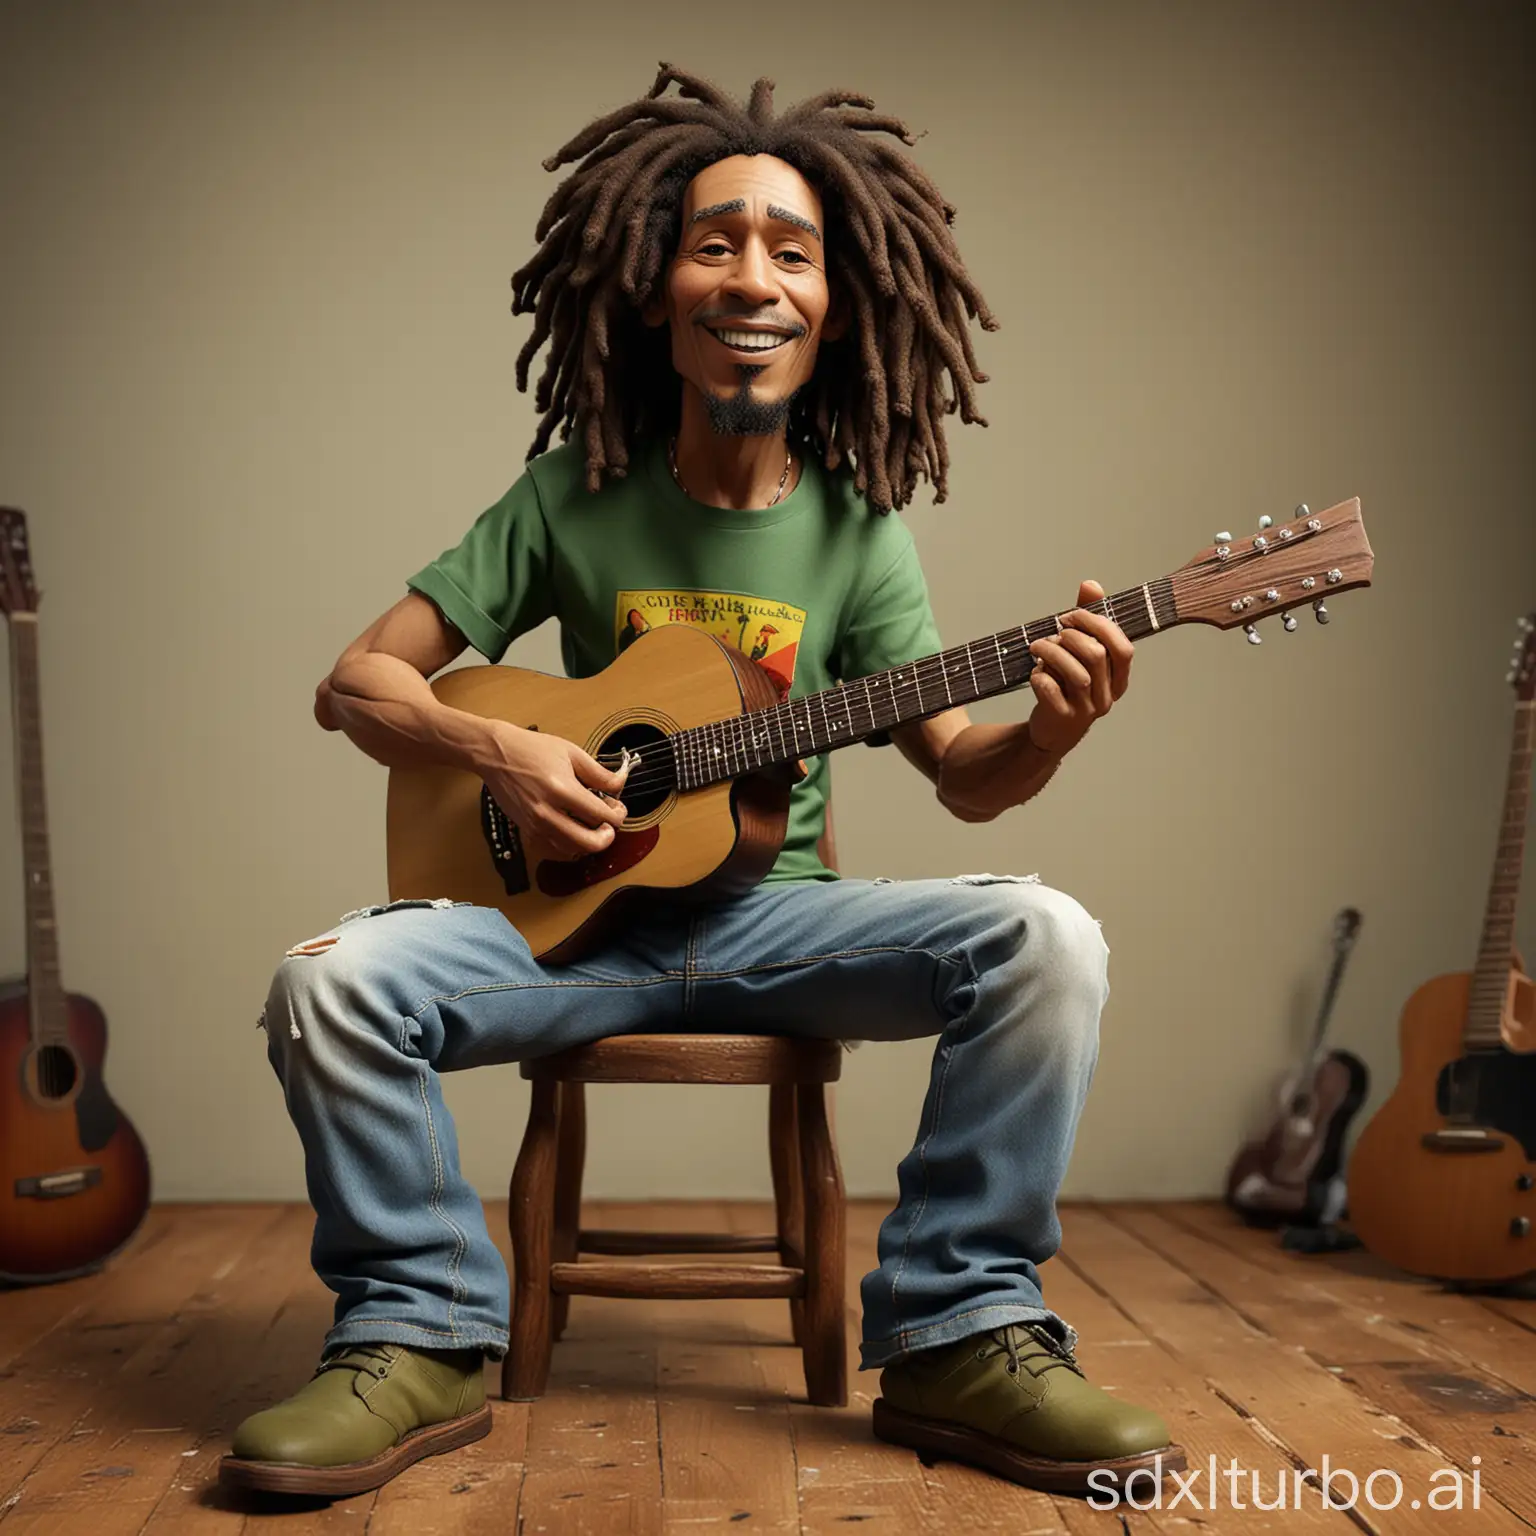 Bob-Marley-Caricature-Playing-Ibanez-Guitar-in-Wooden-Chair